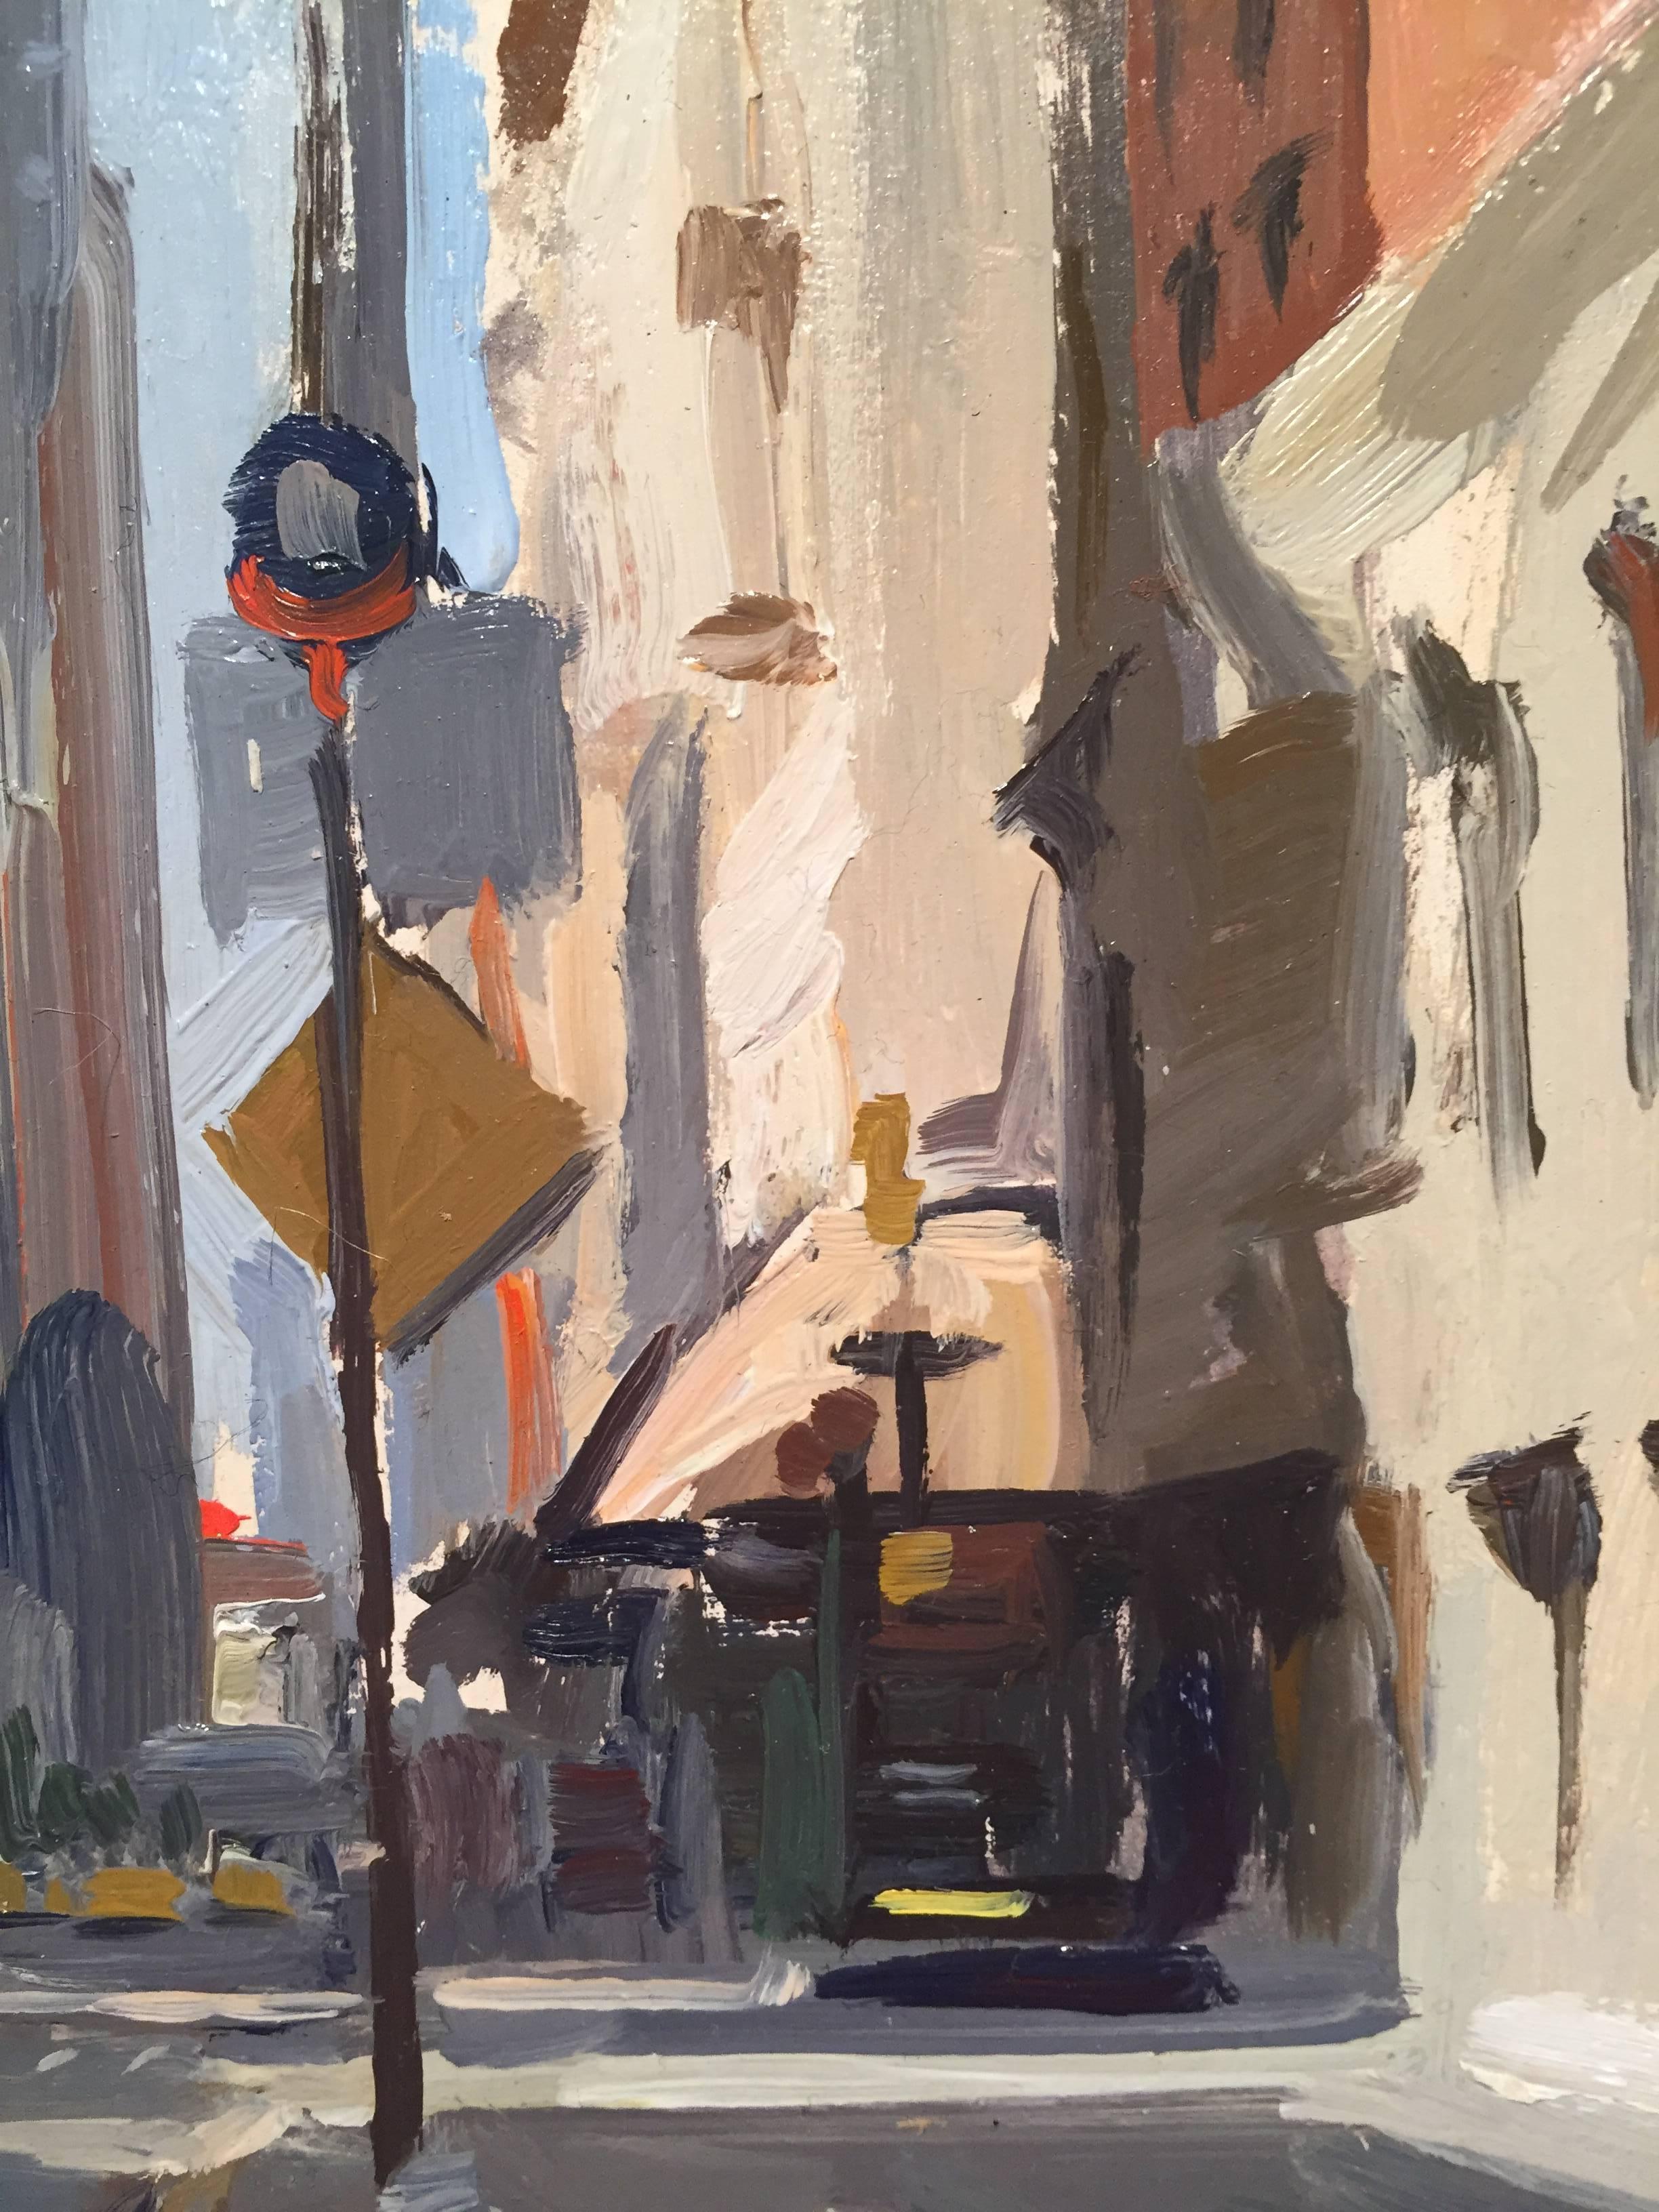 One of Dalessio's talent's is capturing serenity in a chaotic city with his plein-air cityscapes. Church Street Tribeca is a great example of Dalessio's keen eye for light and composition. The viewer is placed directly on the sidewalk, with street